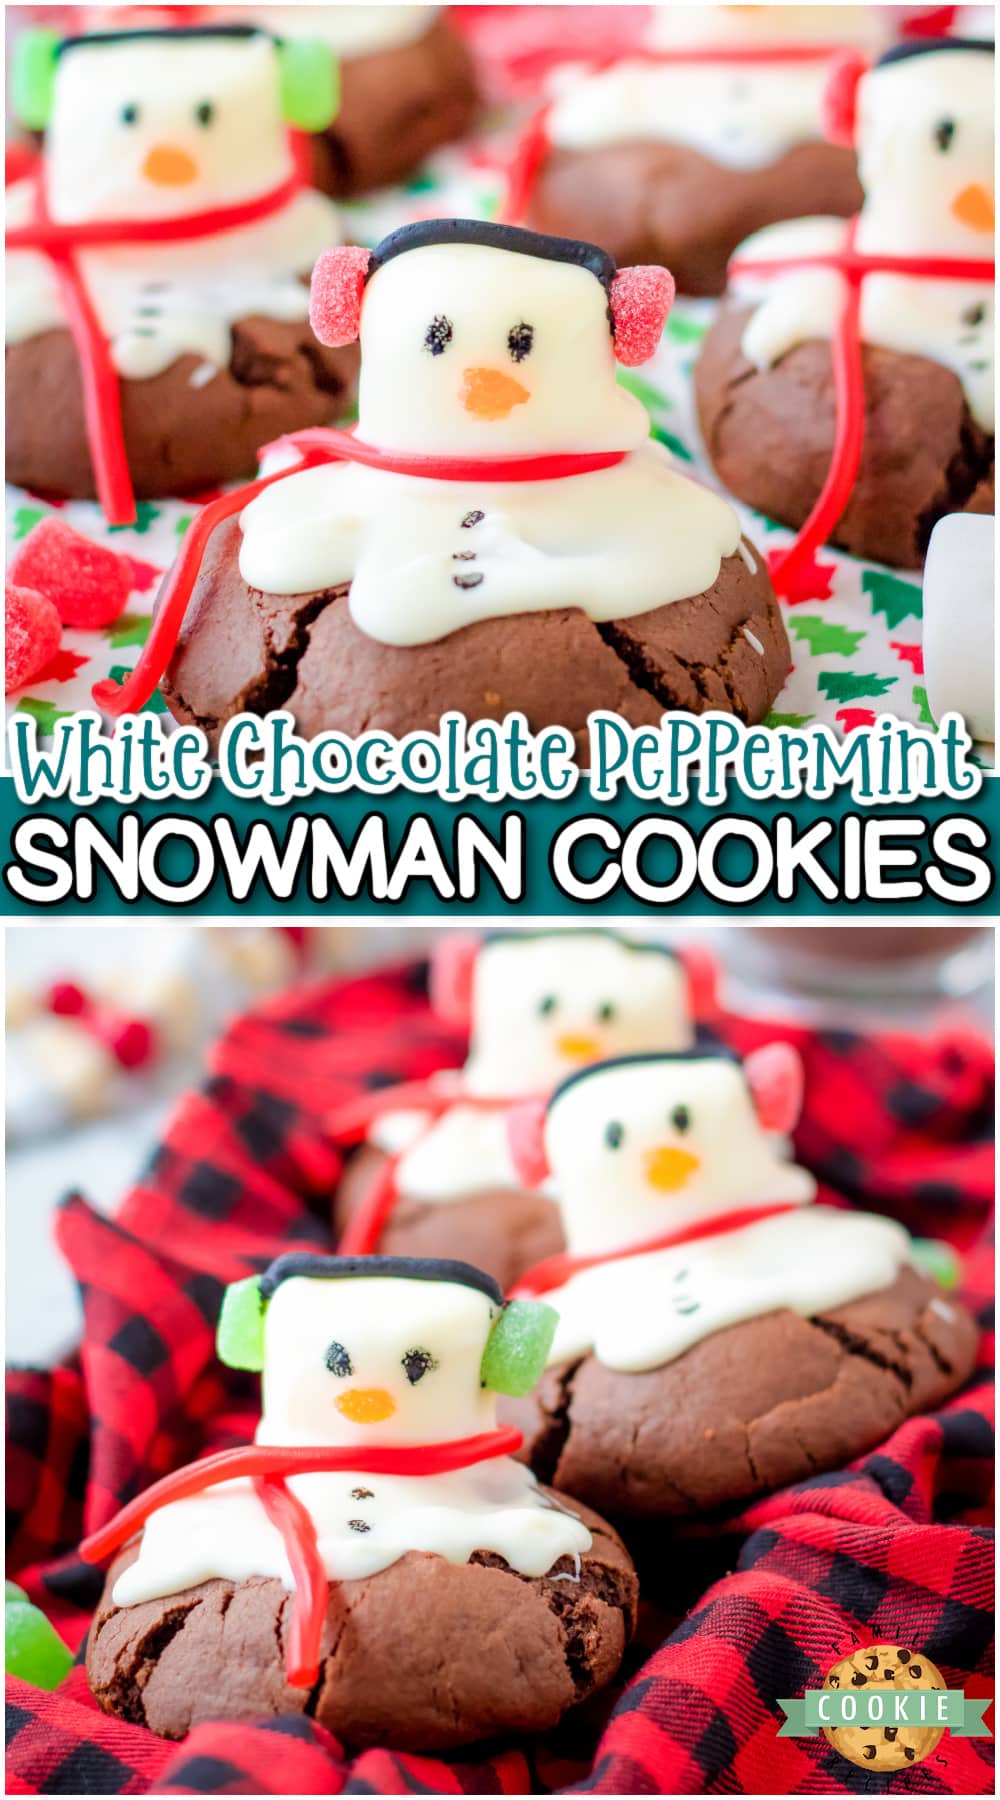 Peppermint snowman cookies are a festive wintery treat! Chocolate cookies stuffed with peppermint patties & decorated with a candy-covered snowman. These cookies are almost too cute to eat!